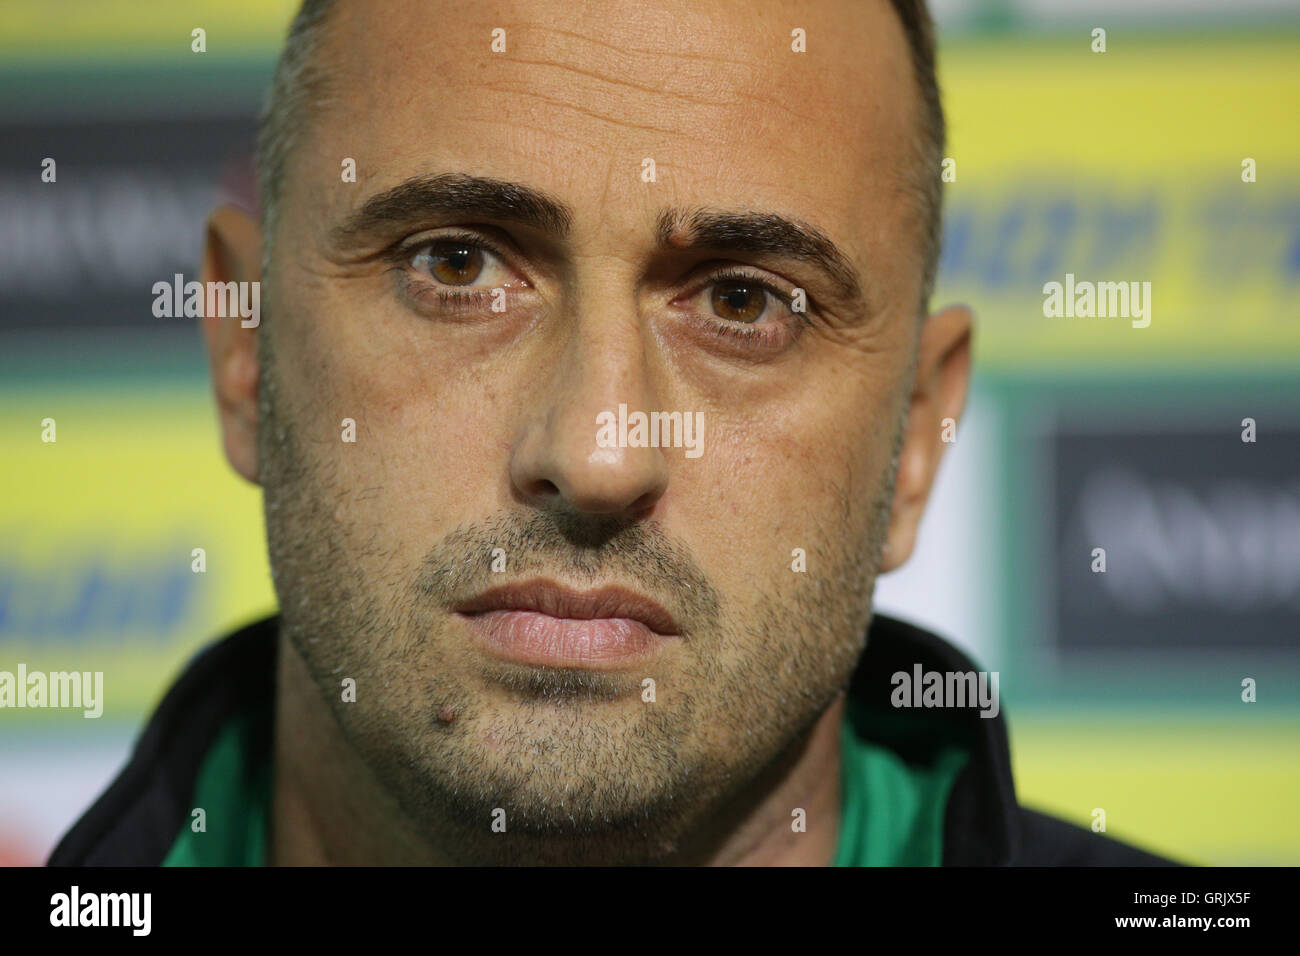 Sofia, Bulgaria - September 5, 2016: Manager of Bulgaria's national football team Ivaylo Petev is speaking to the media during a Stock Photo